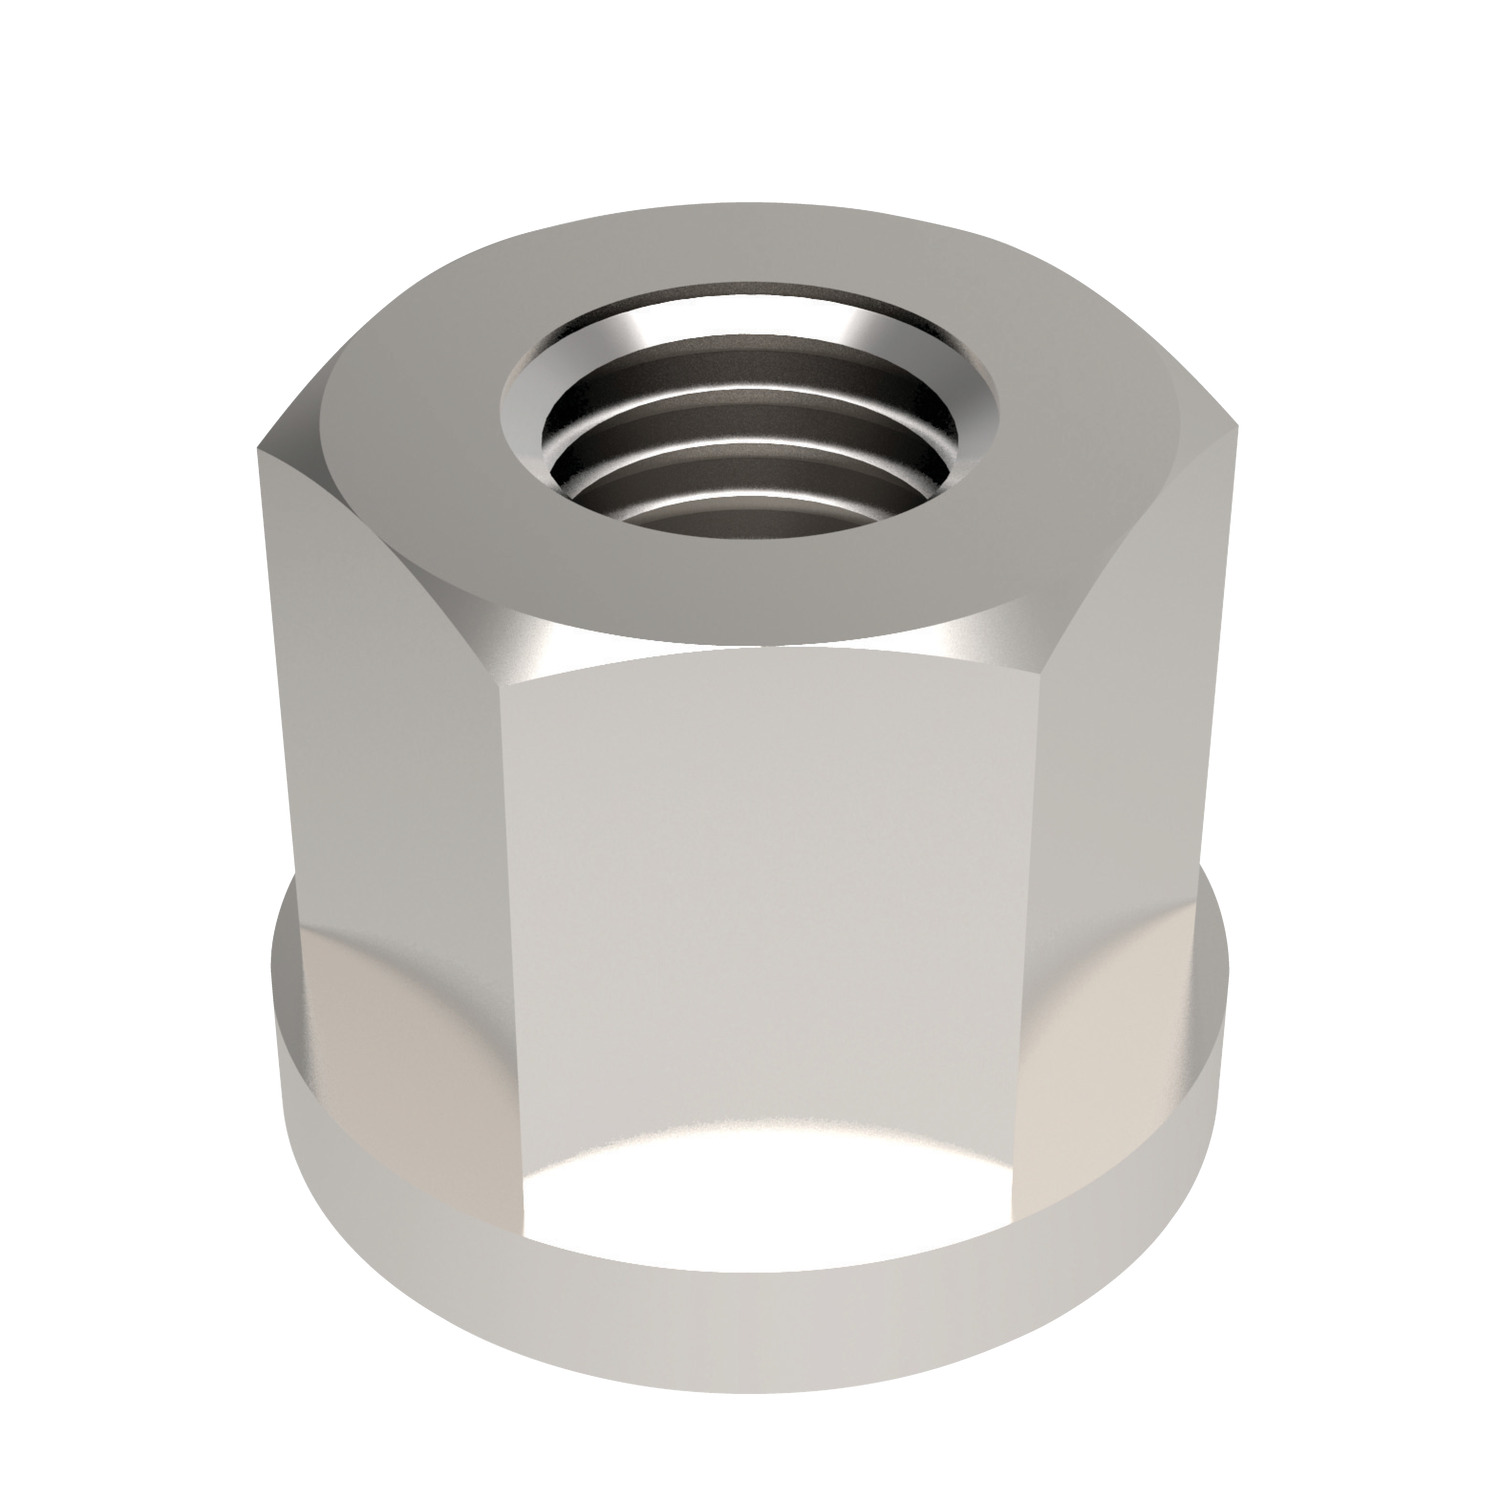 Collar Nuts Stainless steel collar nuts. DIN 6331.